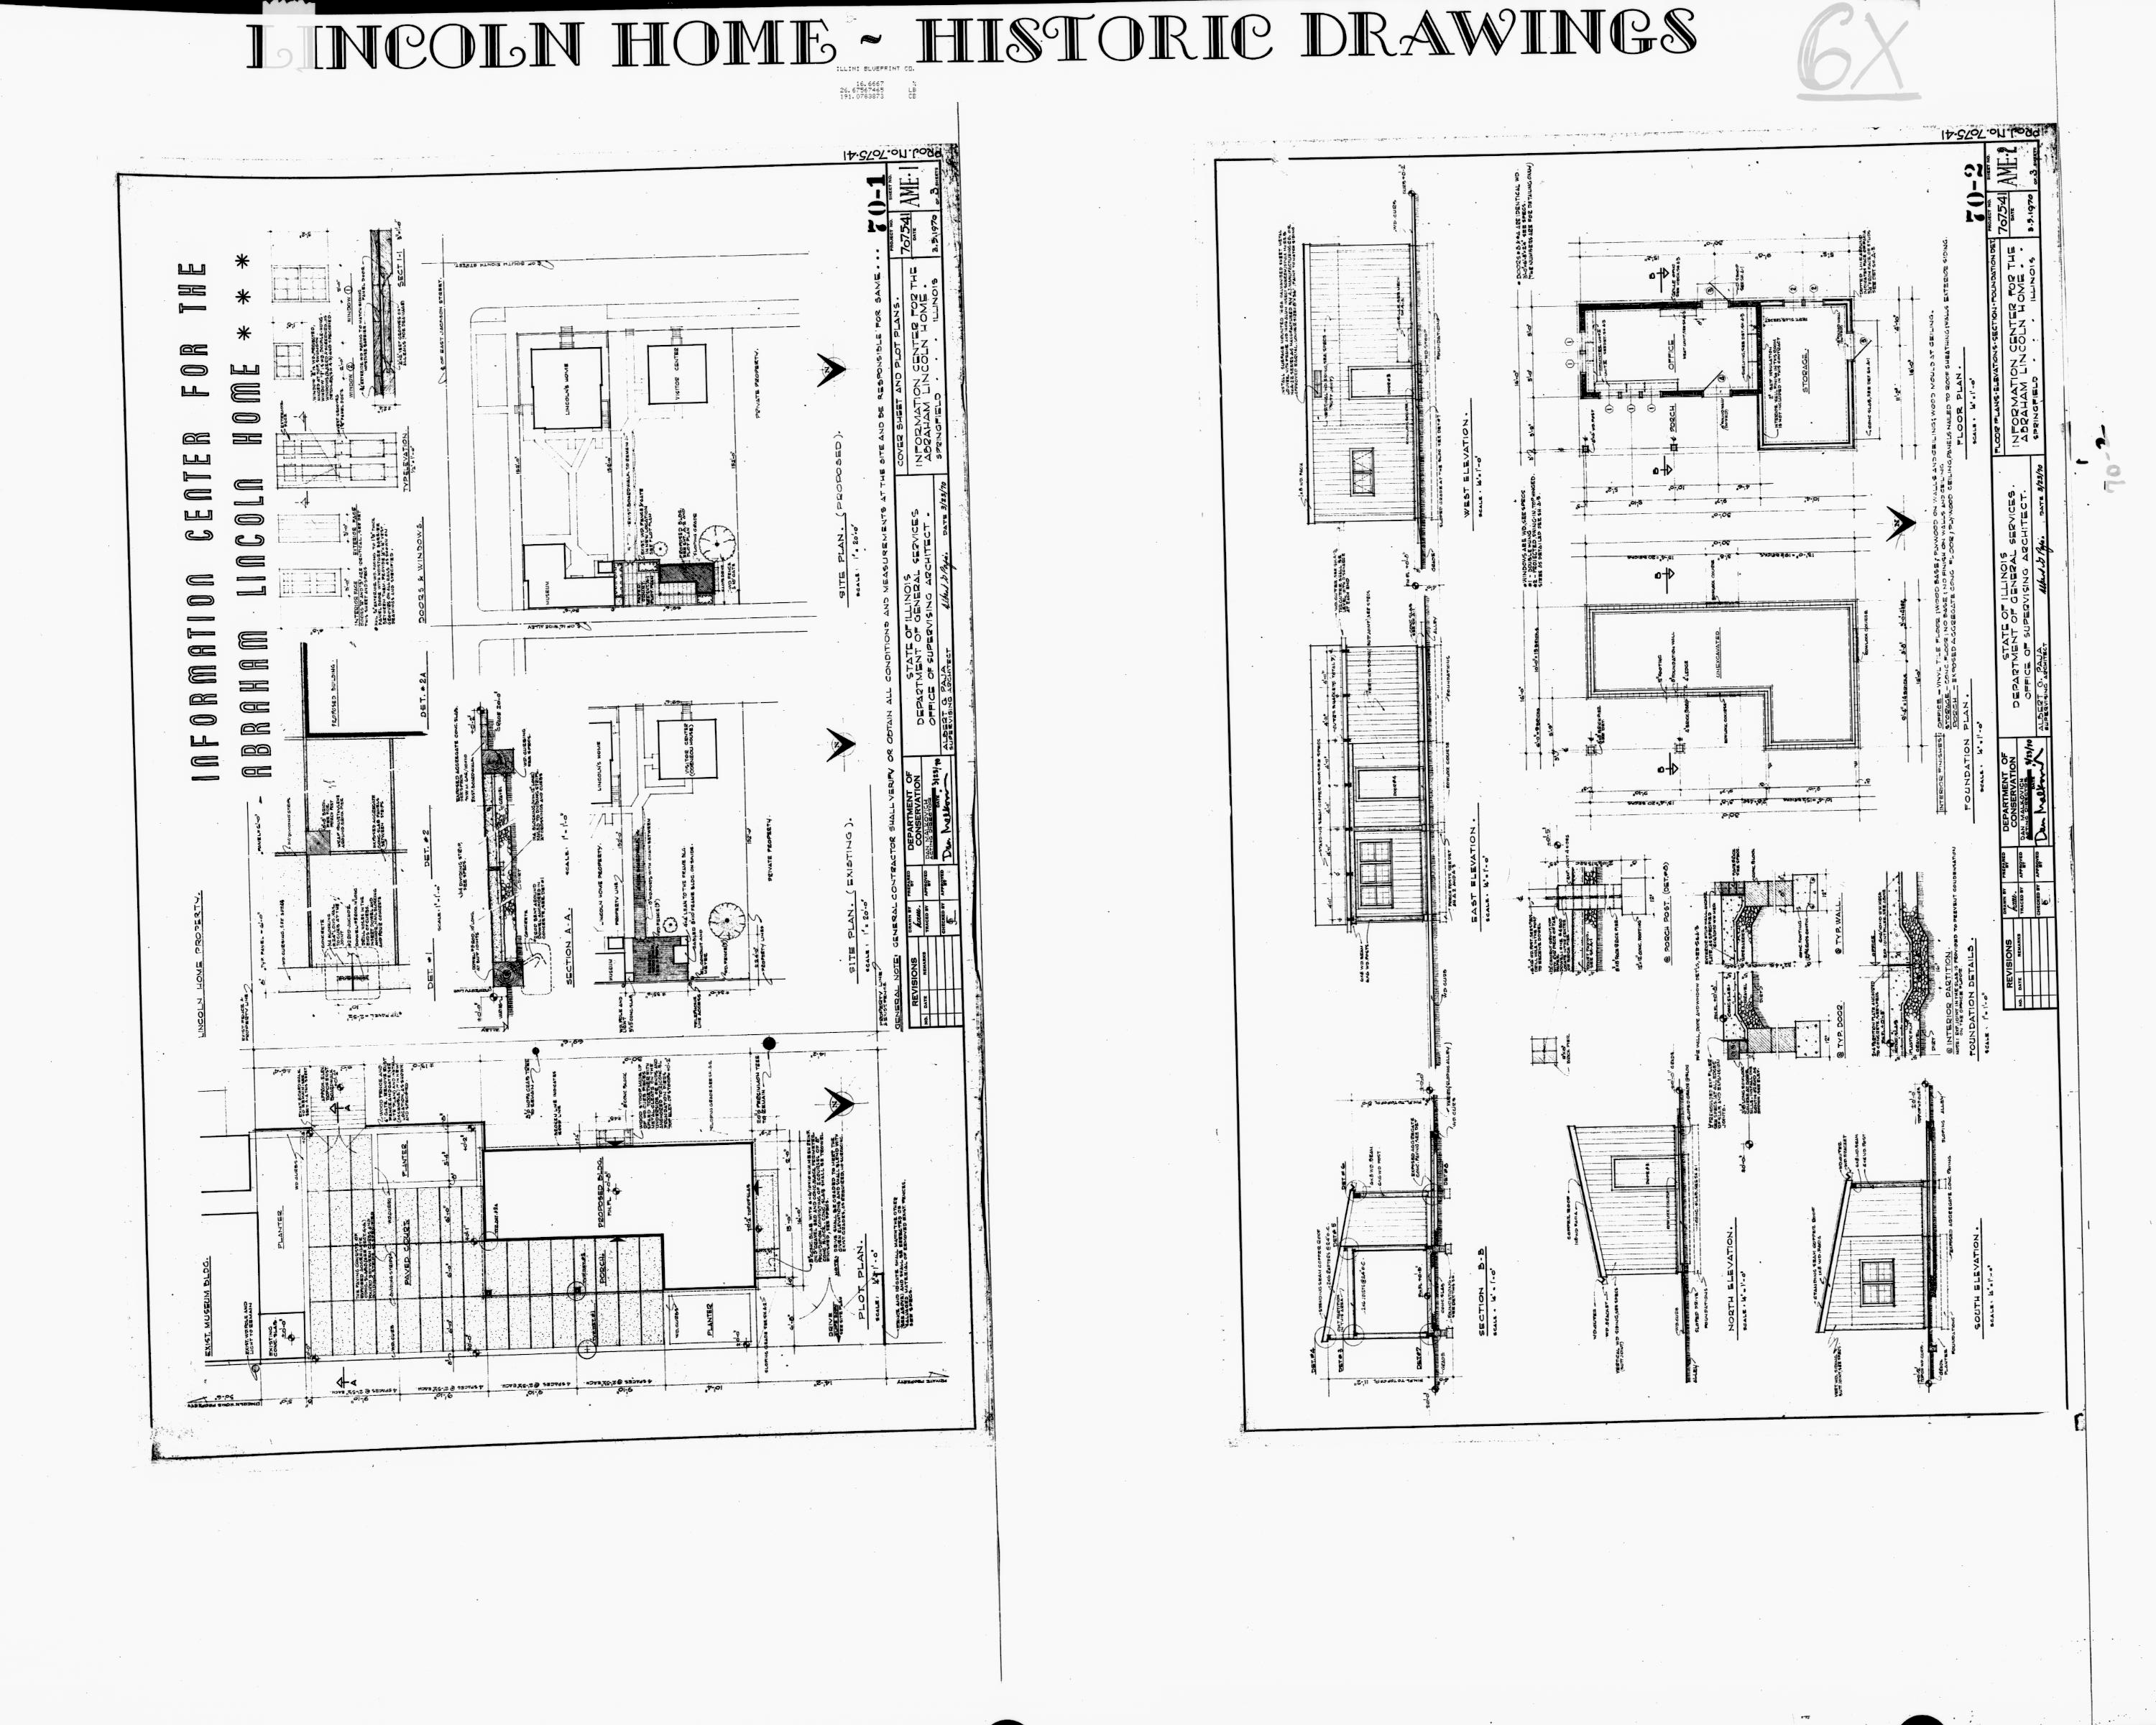 Lincoln Home - Historic Drawings - Perspective - View from Parking Lot 50 Lincoln, home, historic drawings, info center, cover sheet & site plans, floor plans, elevations and sections